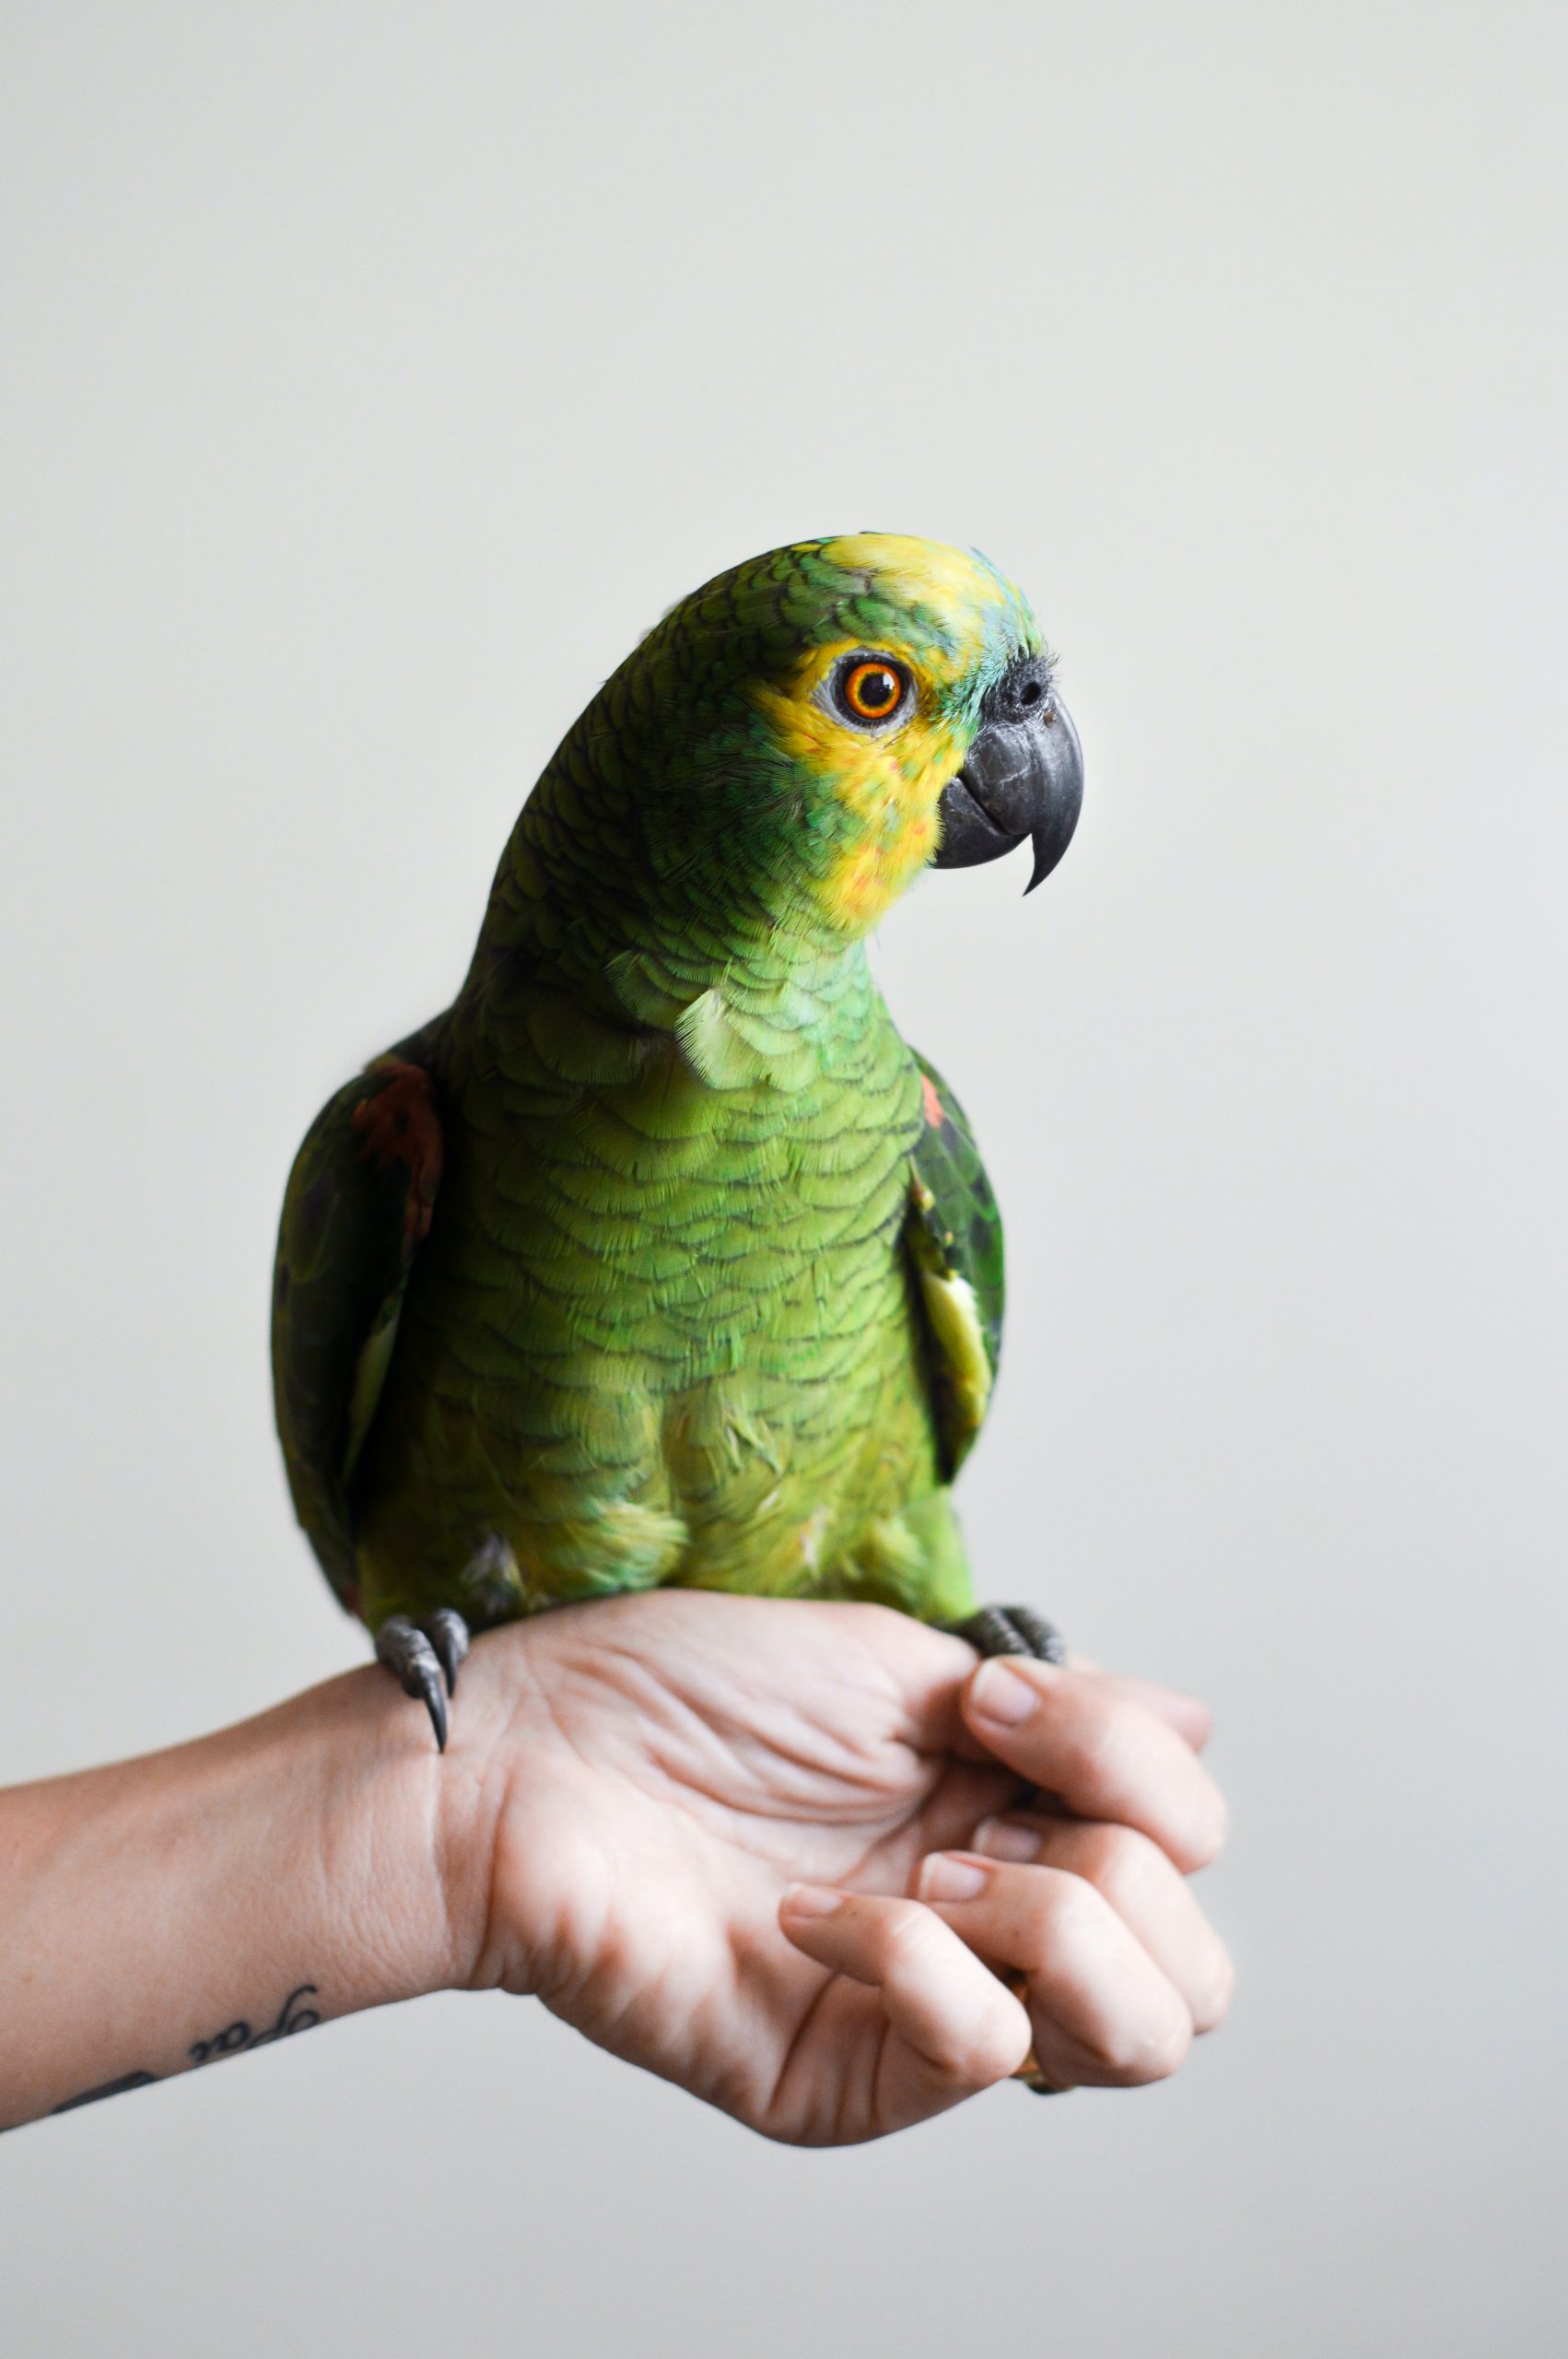 green-parrot-on-person-s-hand